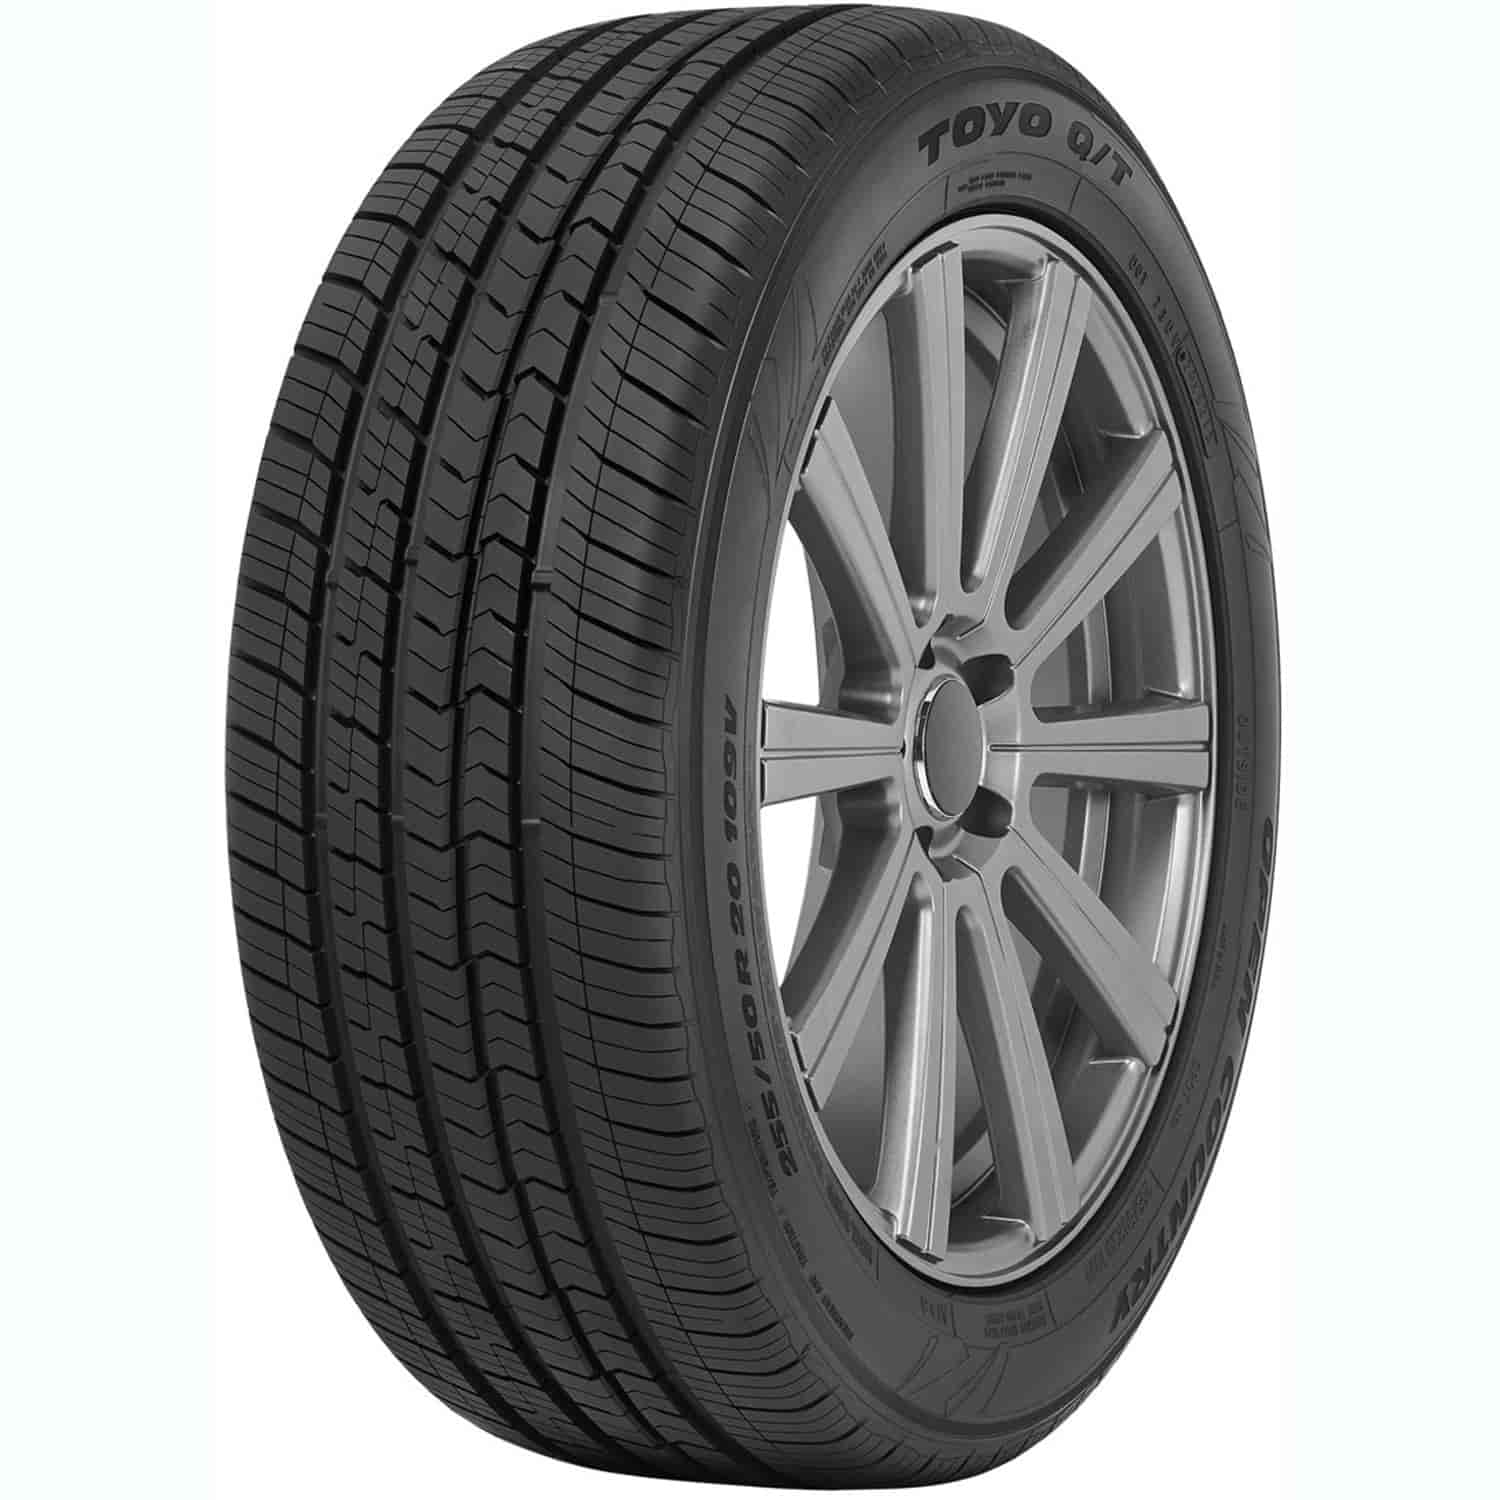 OPEN COUNTRY Q/T 215/70R16 100H